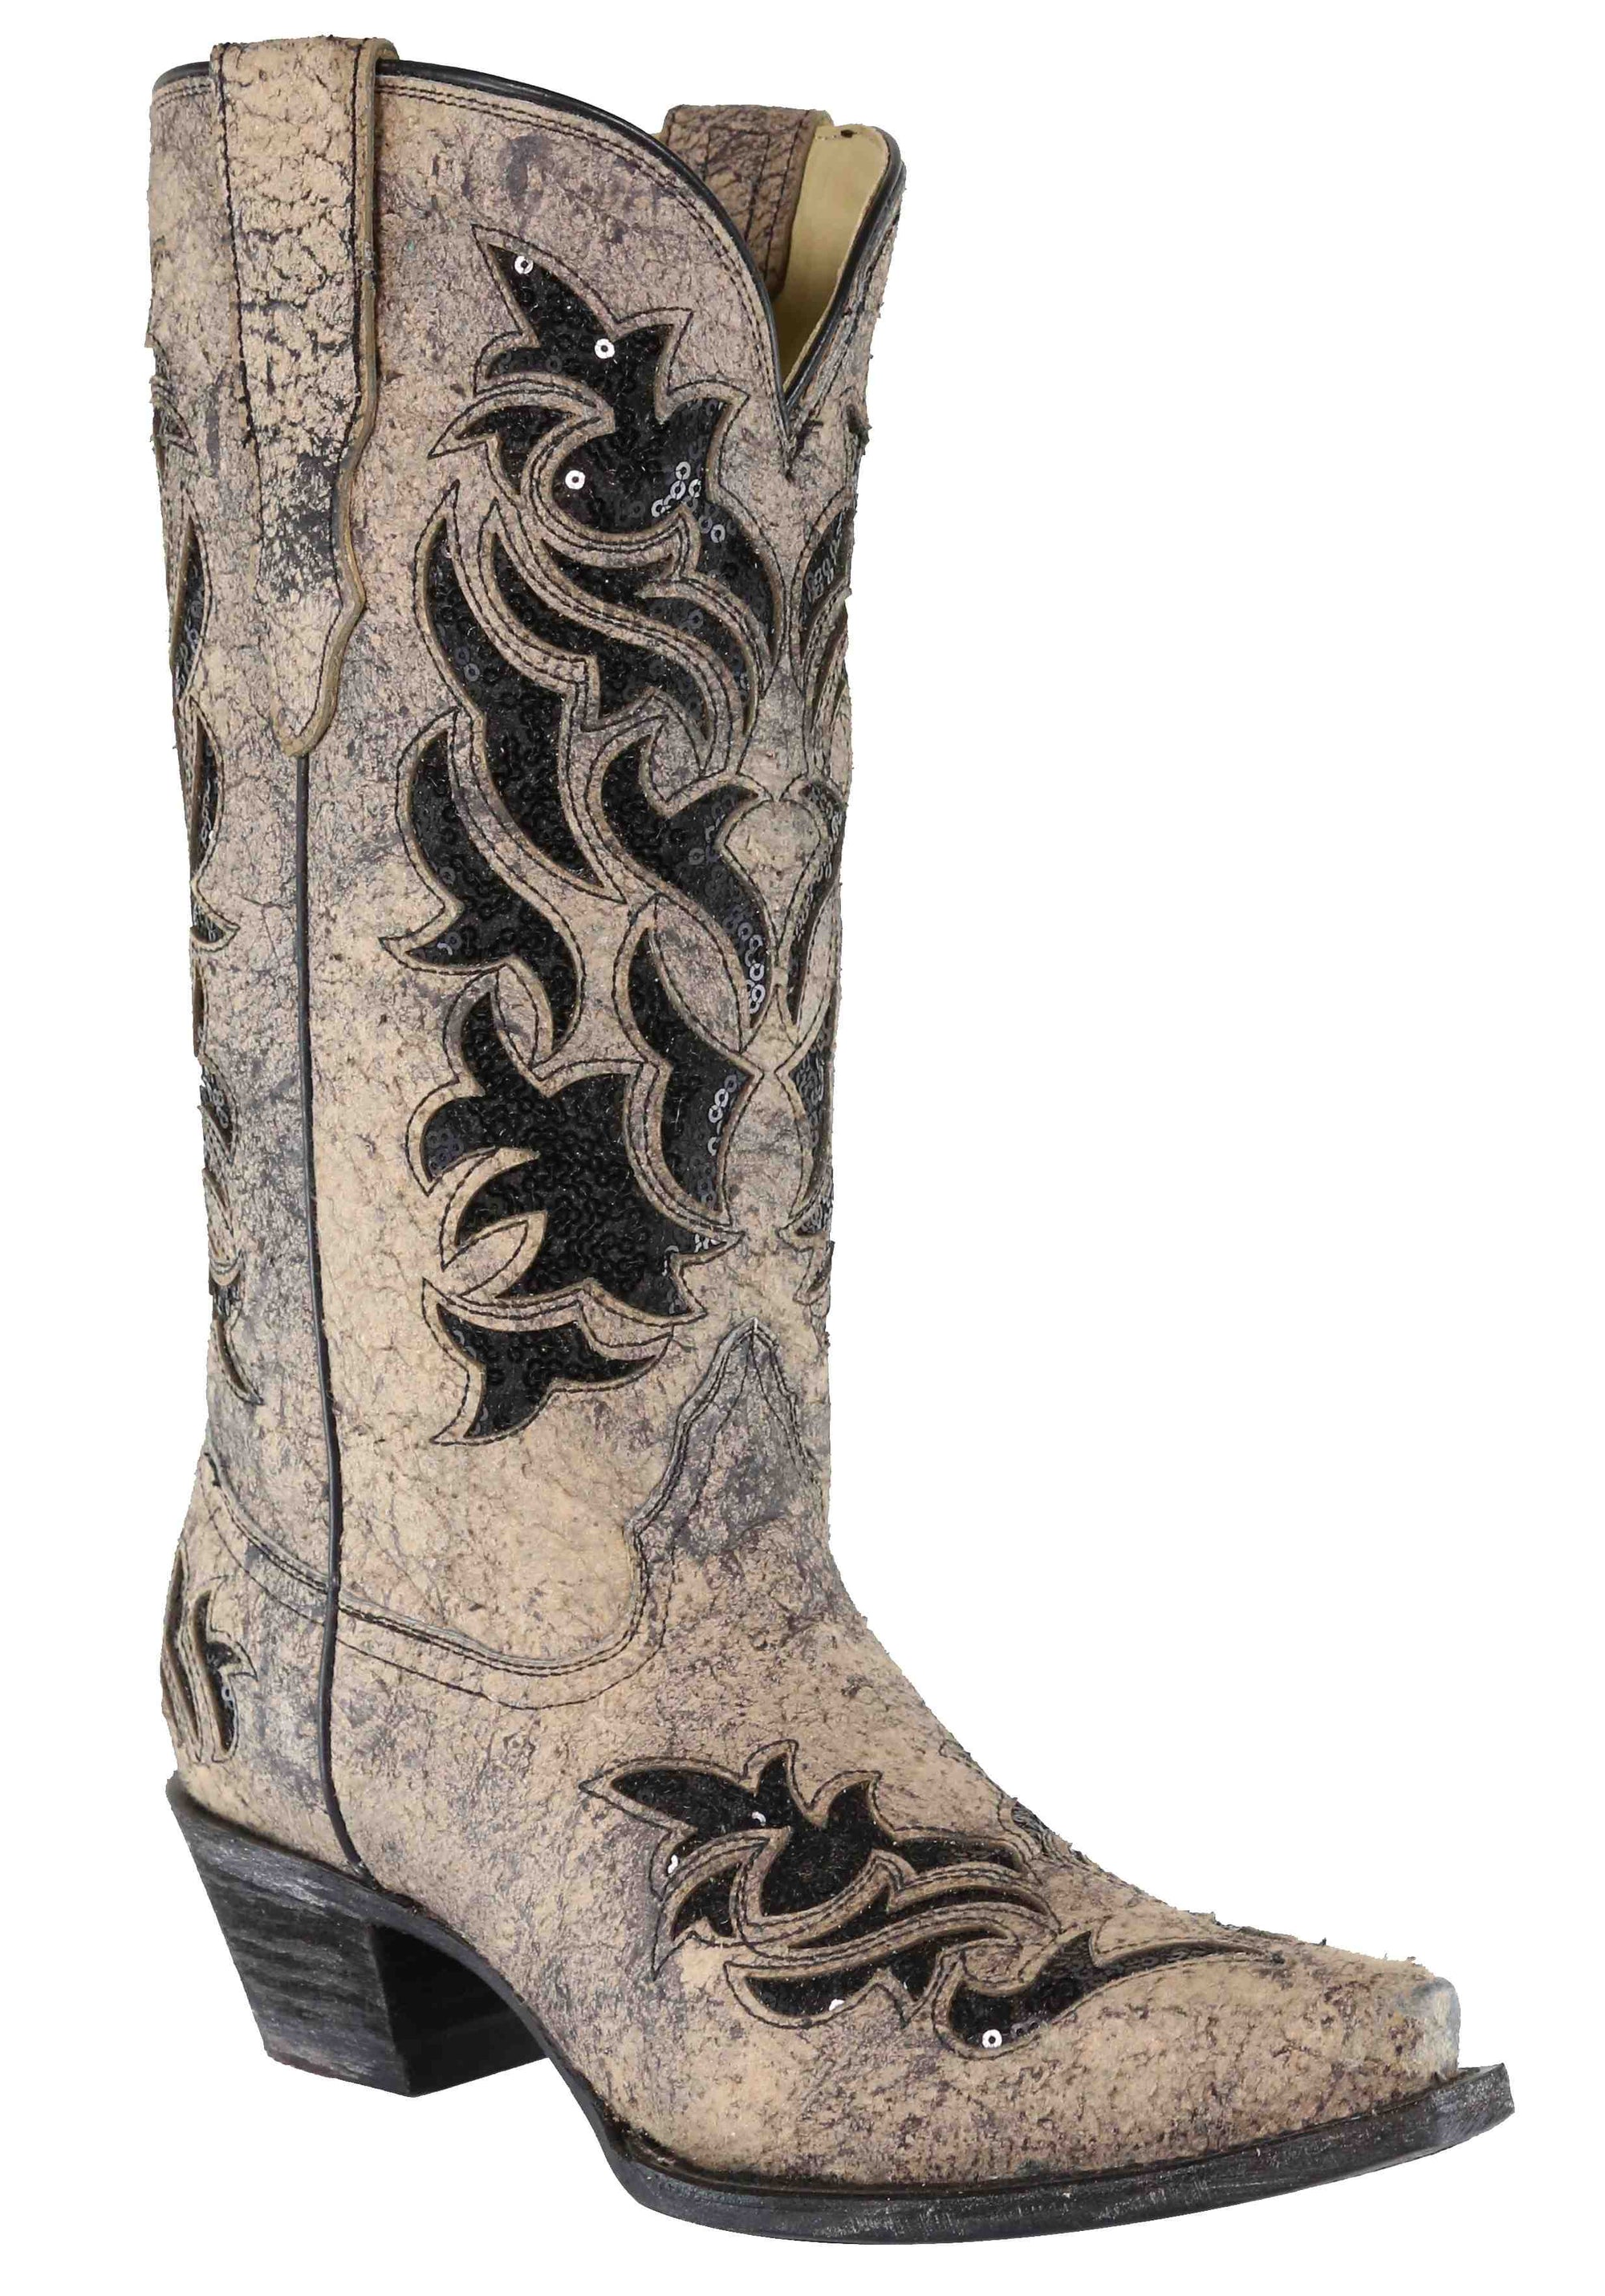 CORRAL BOOTS Womens Corral Women's Black Glitter Sequin Inlay Western Boot E1237